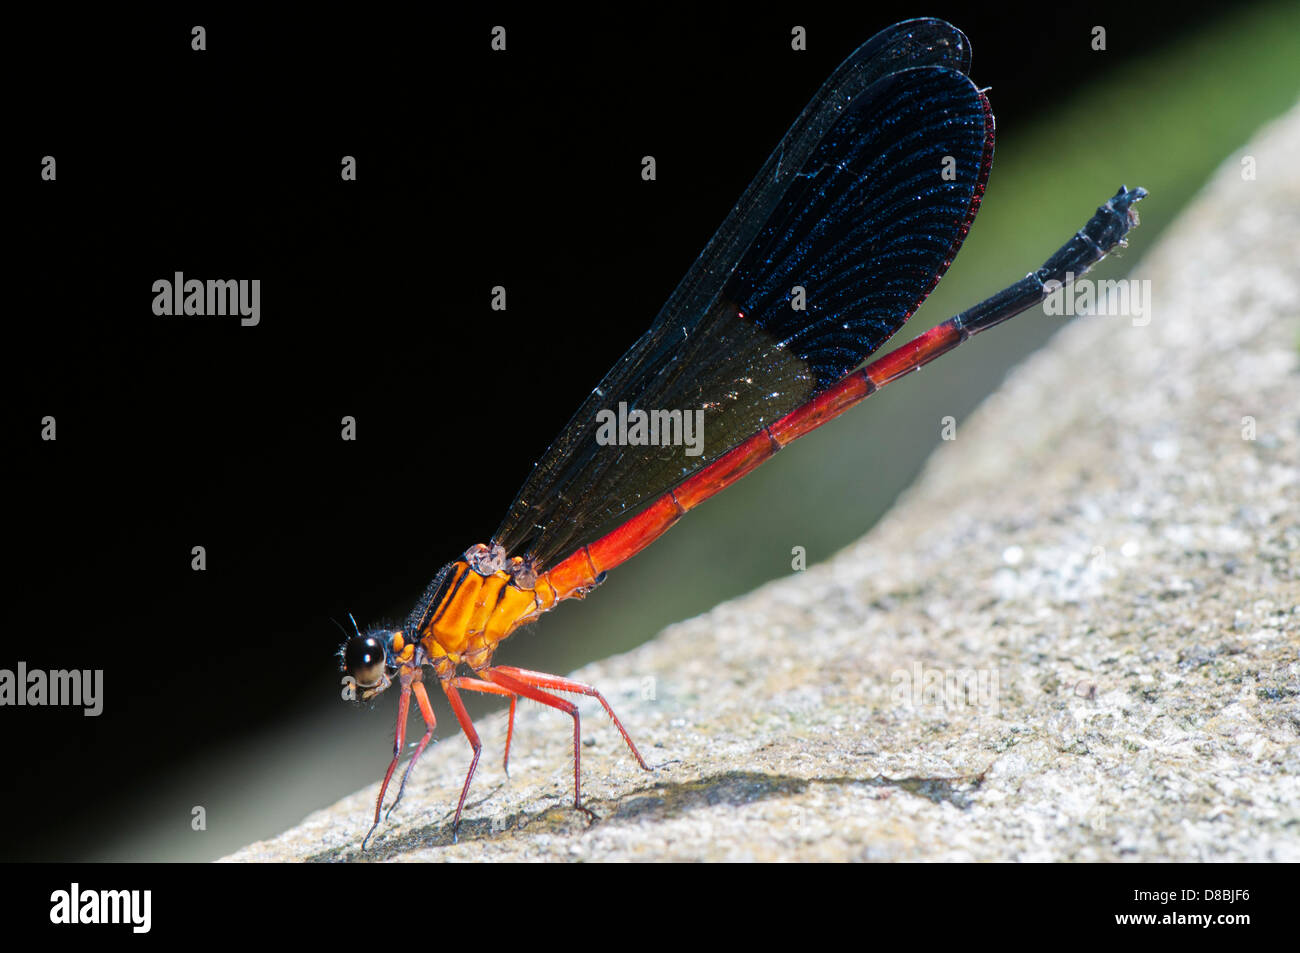 Large red damselfly adult, side view Stock Photo